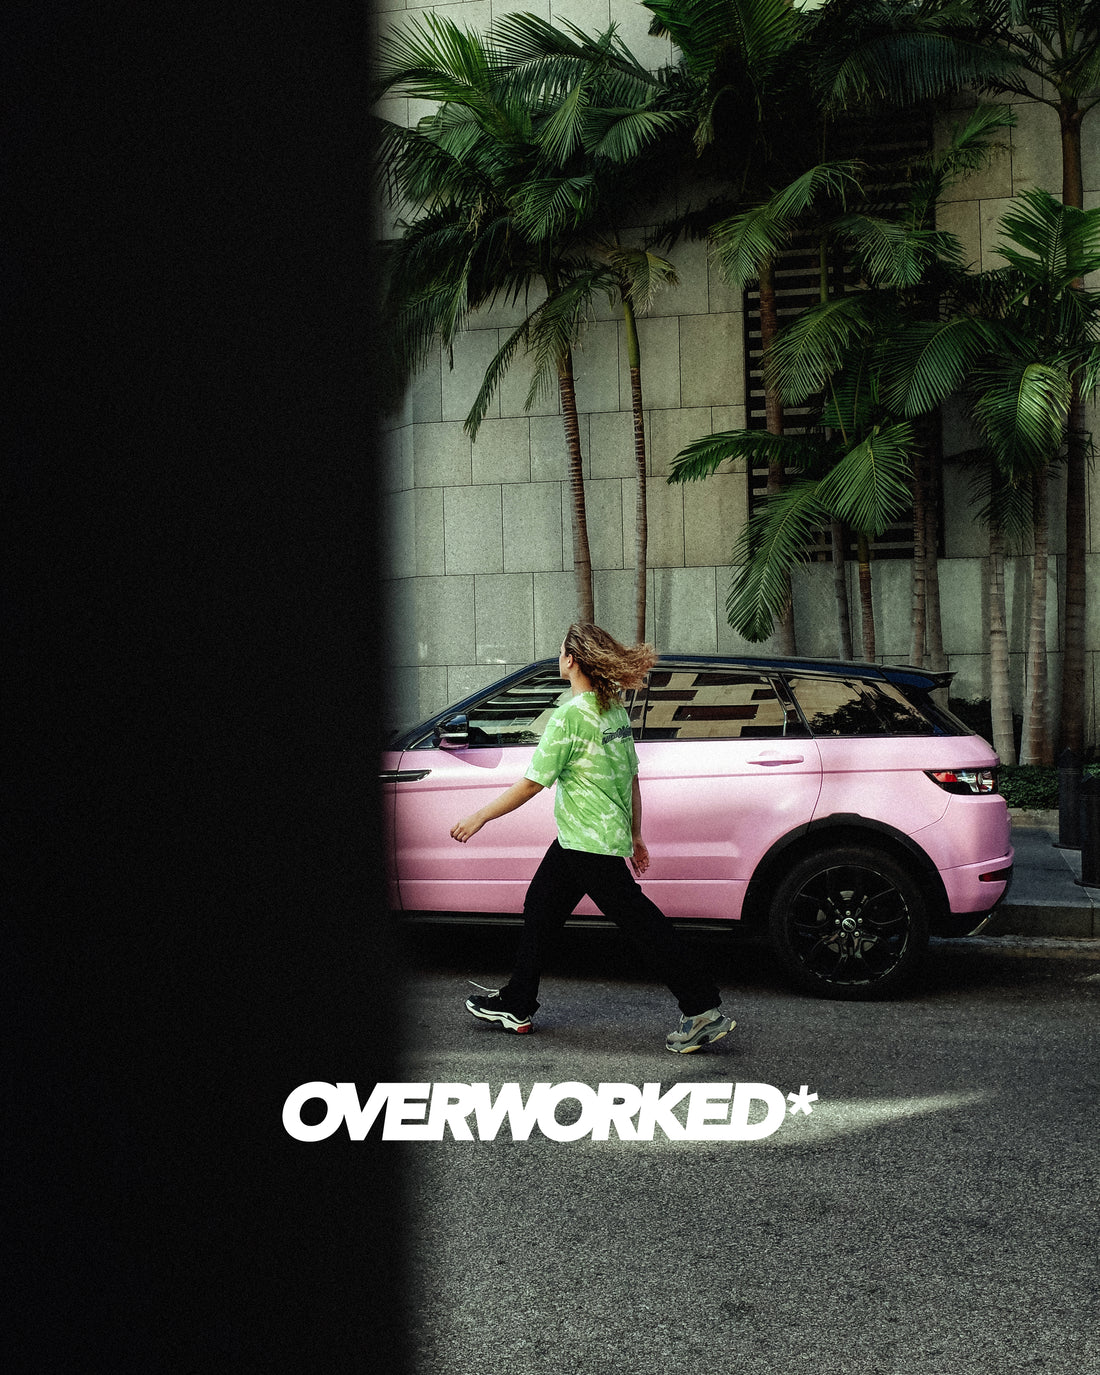 OVERWORKED*: Launched